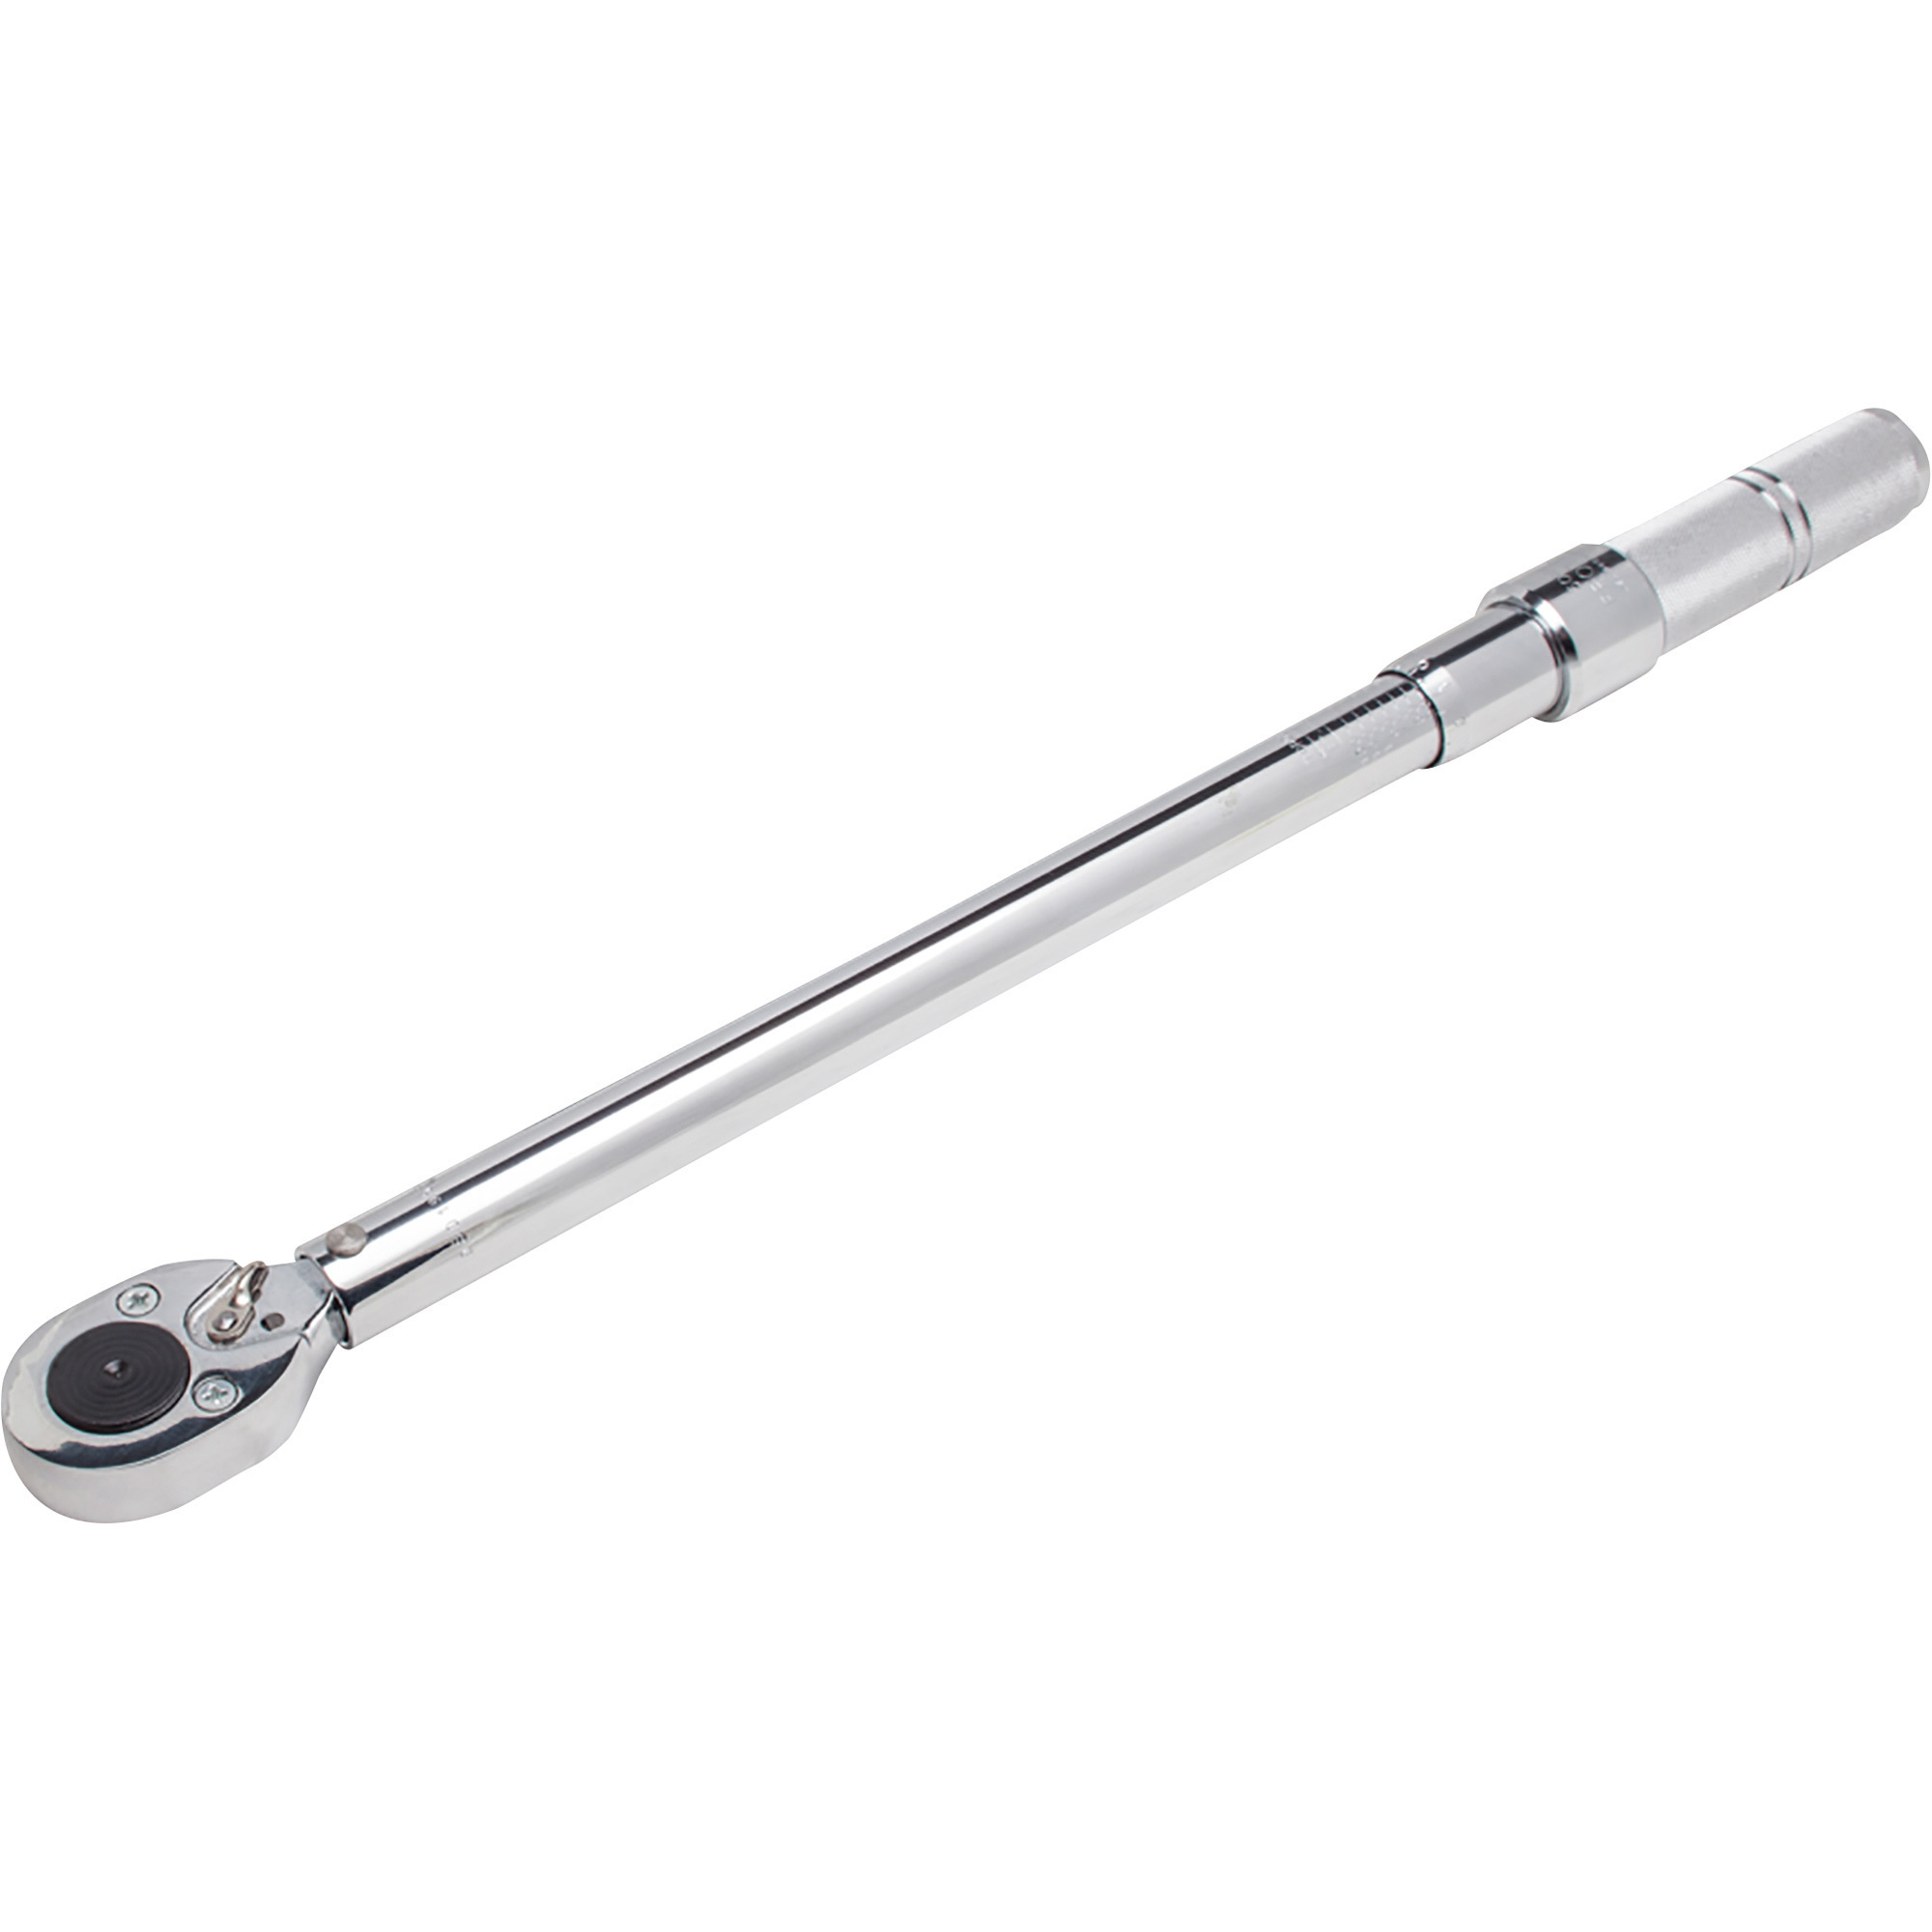 Gedore - Open End Torque Wrench Interchangeable Head: 16 mm Drive -  20731337 - MSC Industrial Supply